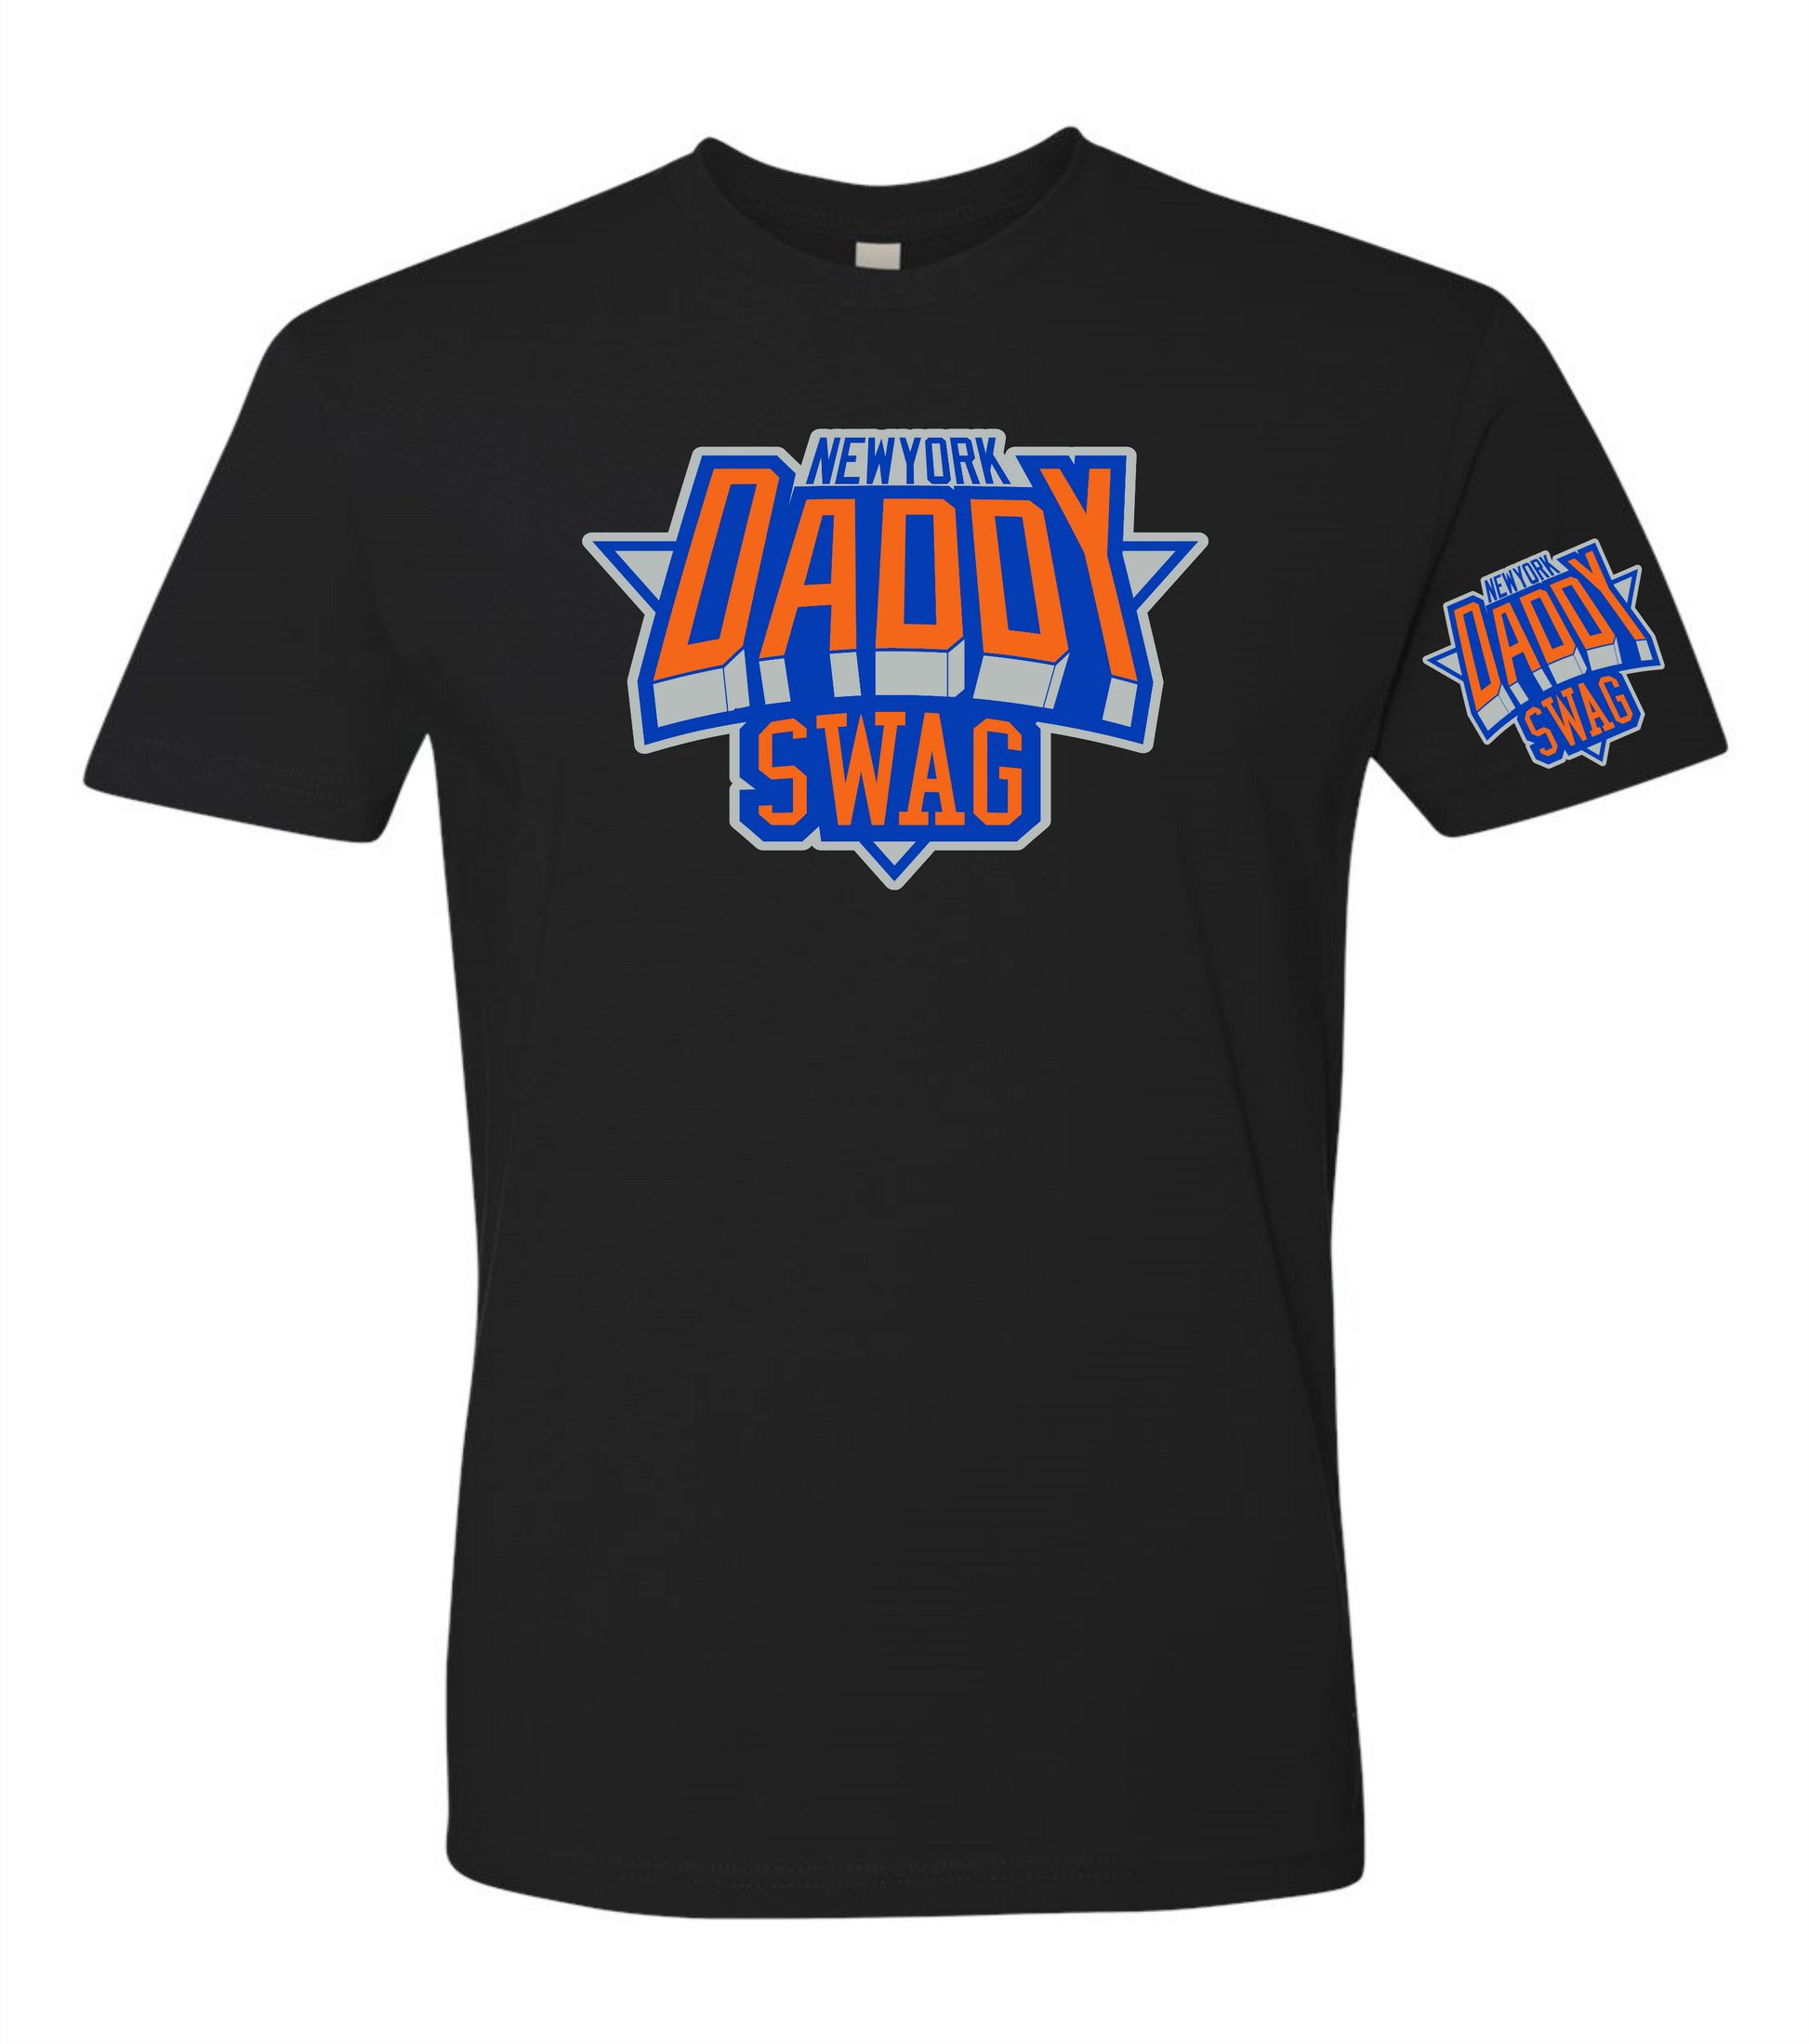 Daddy Swag New York Collection - Daddy Swag Apparel 